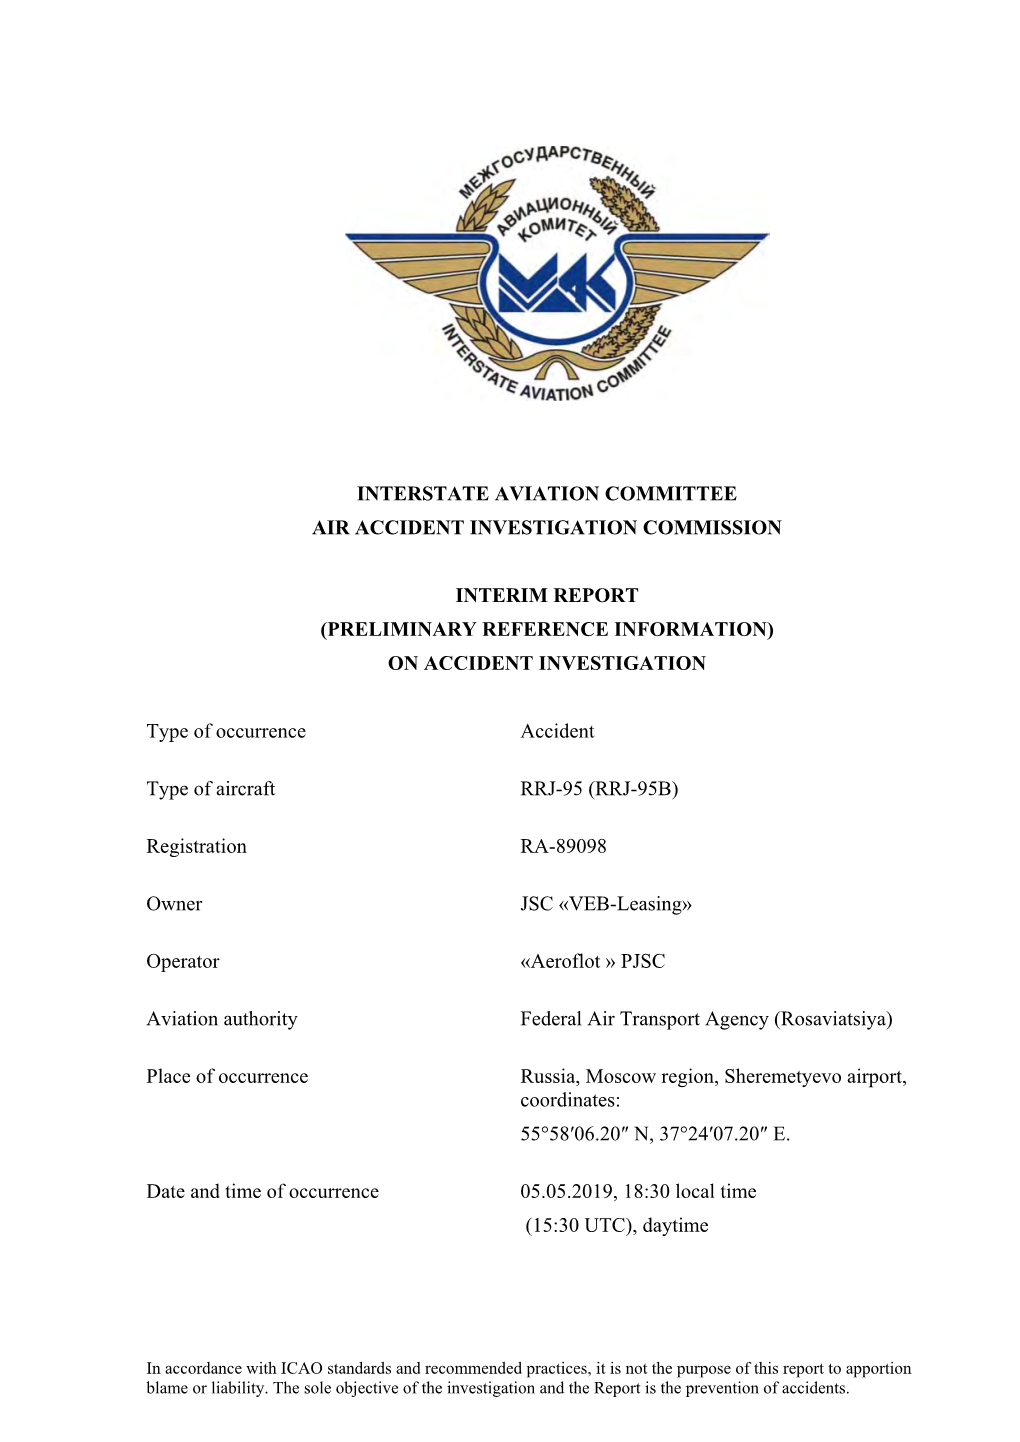 Interstate Aviation Committee Air Accident Investigation Commission Interim Report